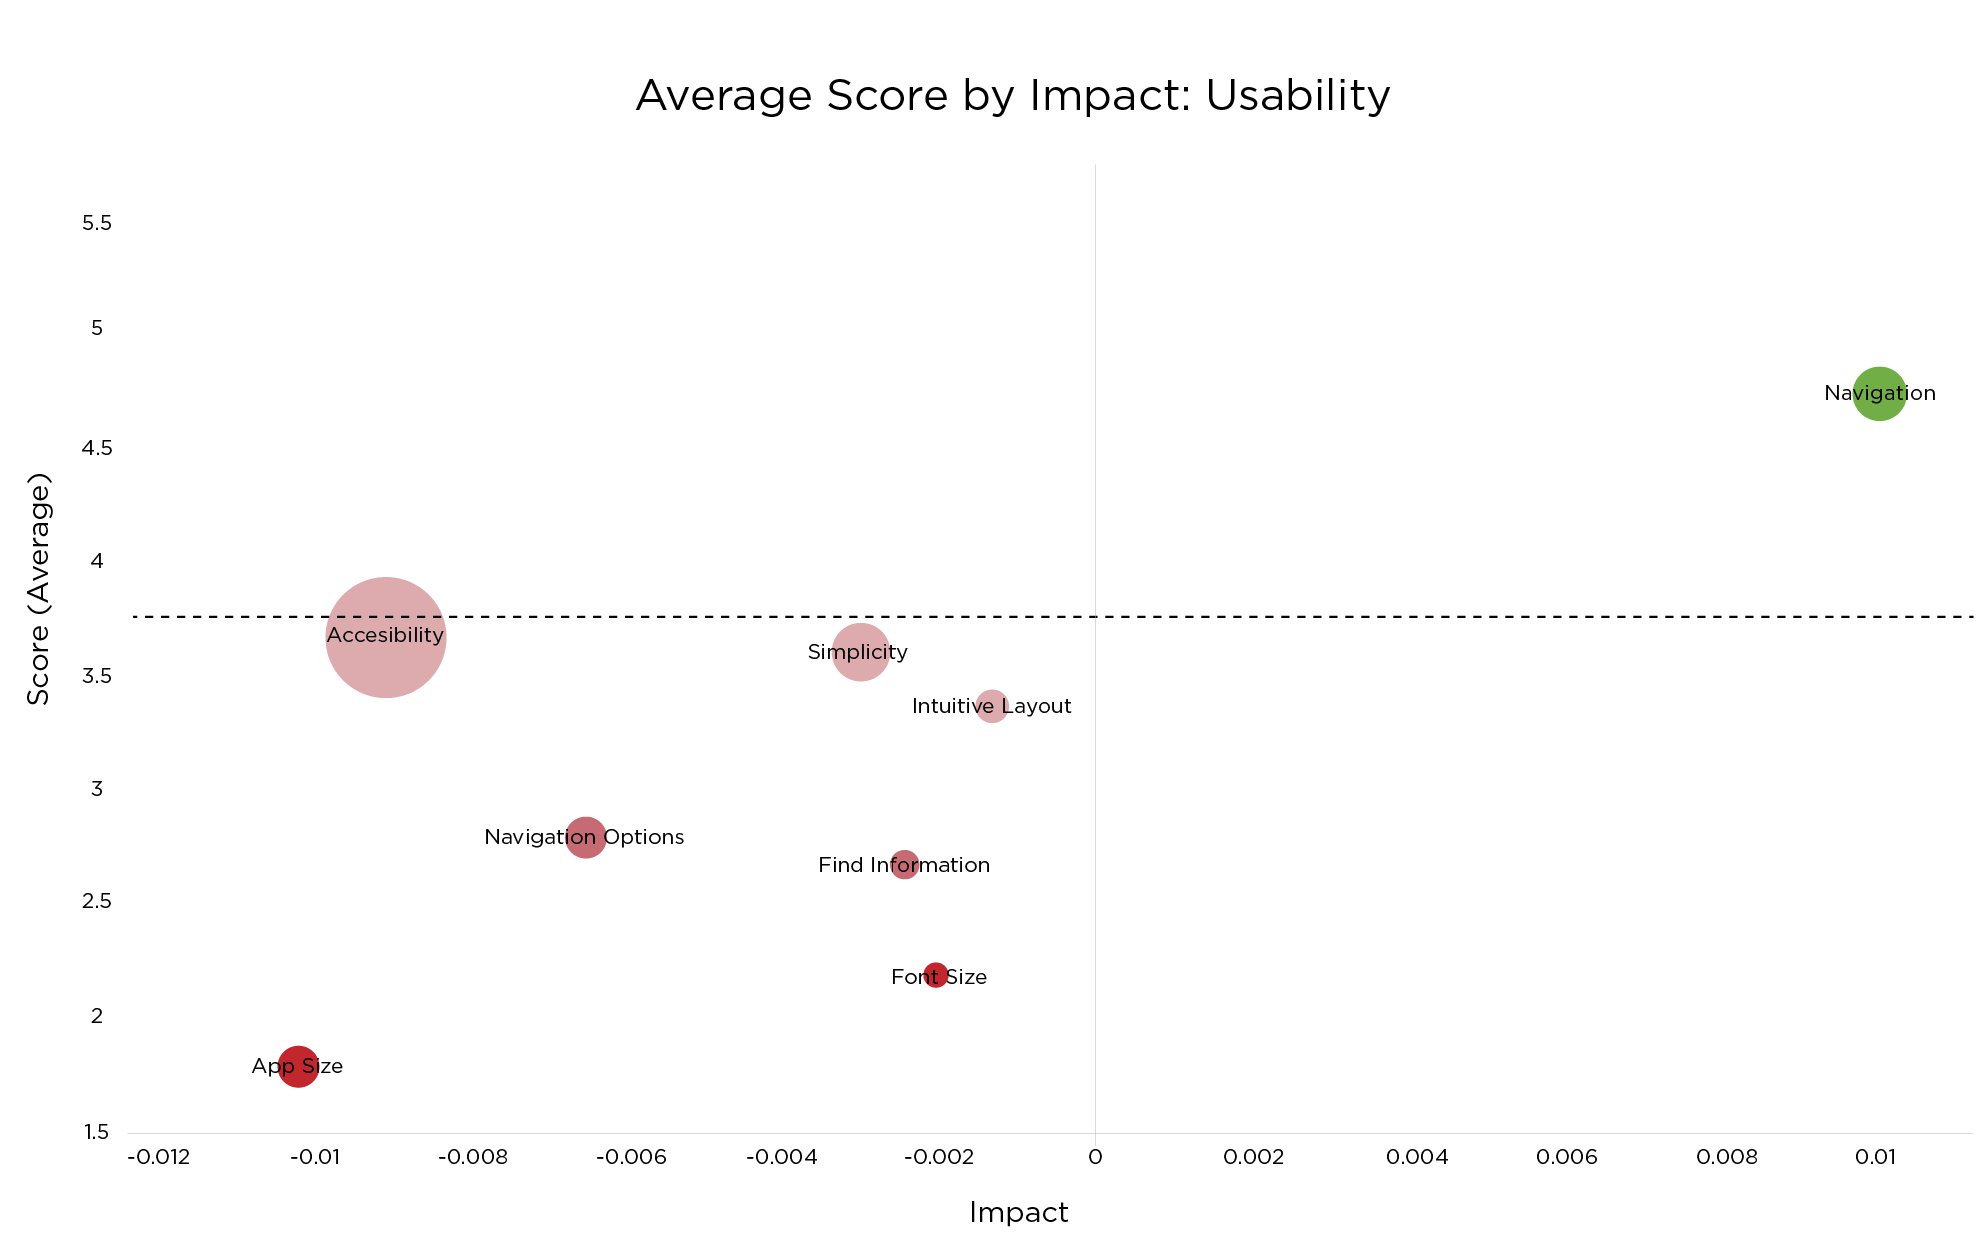 Impact of app usability issues